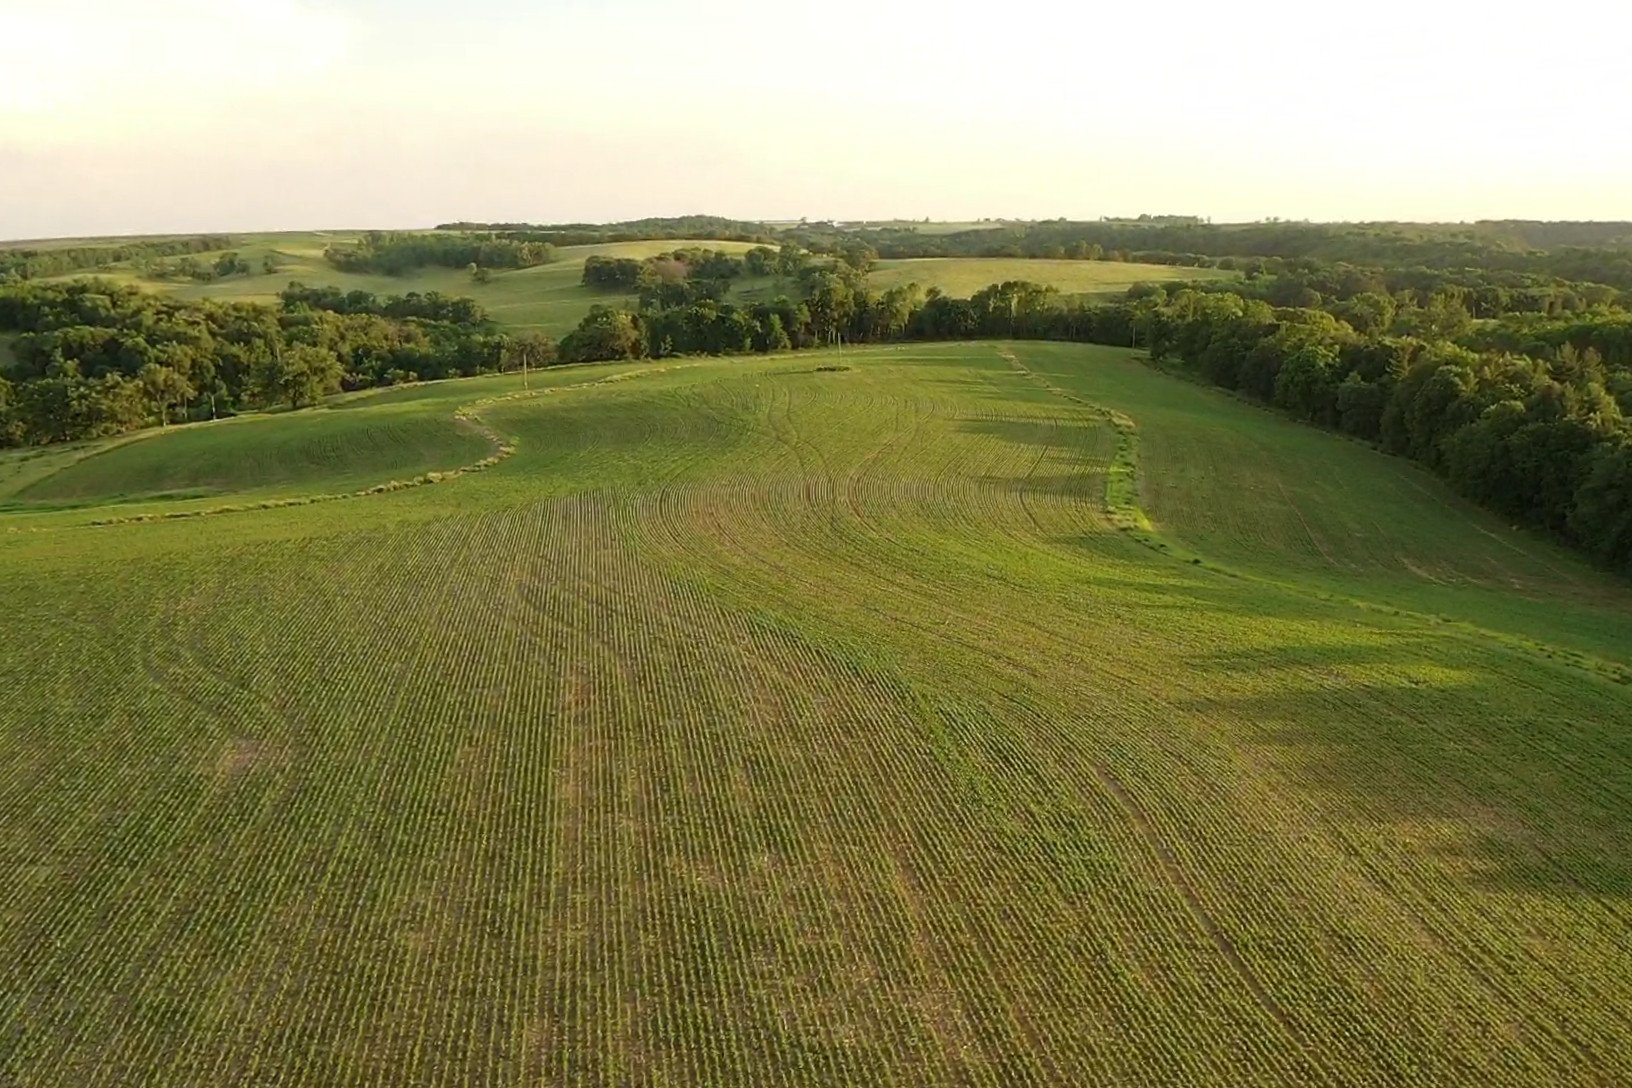 auctions-land-grant-county-wisconsin-200-acres-listing-number-16211-screen_03db885b37f288b4_1655859837339-2.jpg